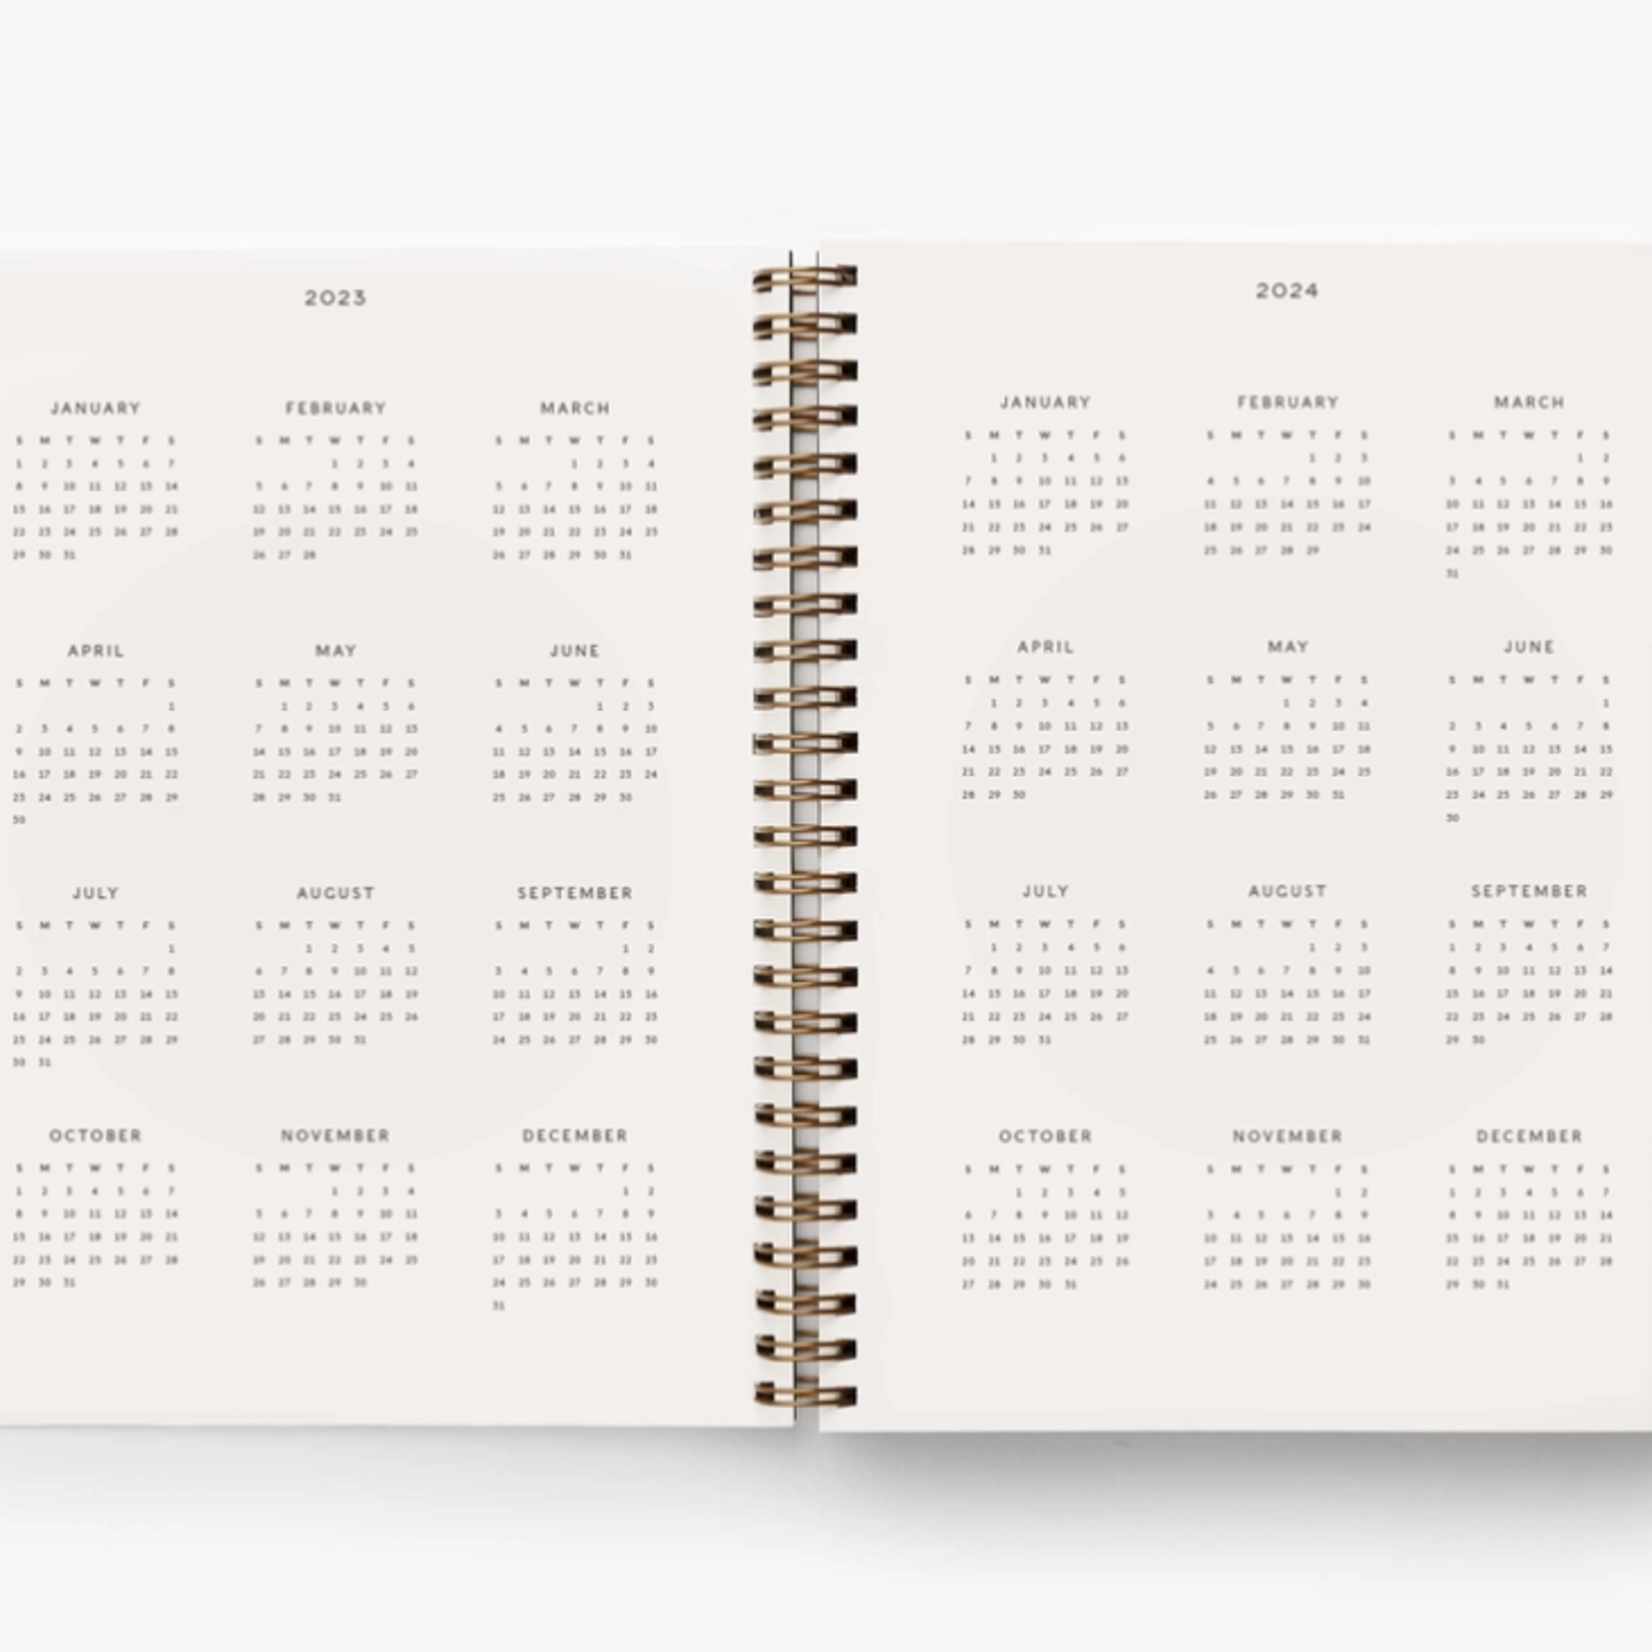 Softcover Spiral 2023 Planner Mayfair